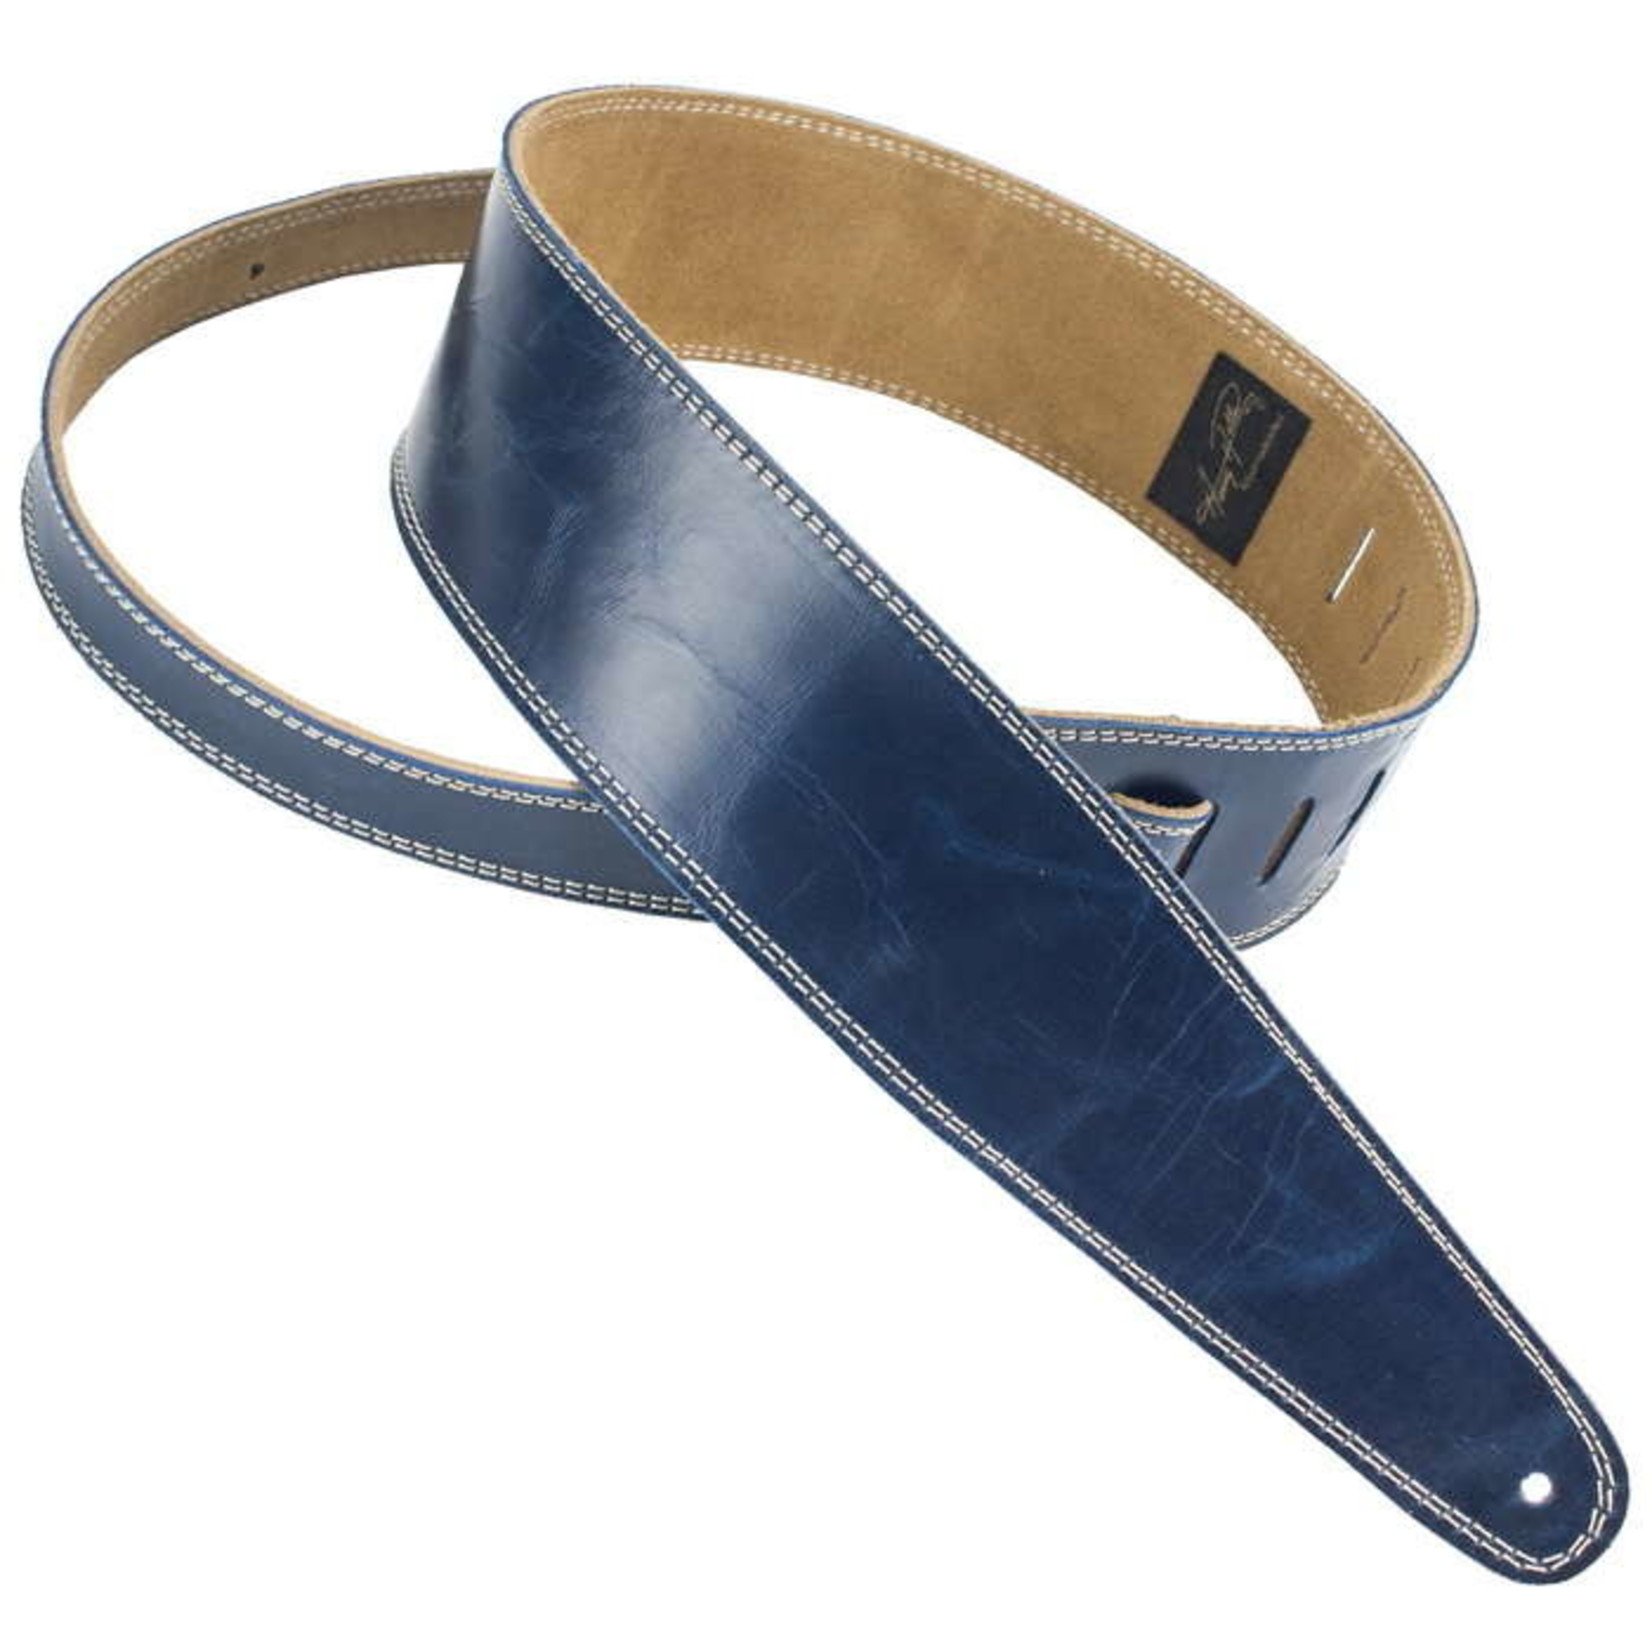 Henry Heller Henry Heller 2.5" Premium Garment Leather Strap w/ Suede Backing, Vintage Blue with Cream Stitching